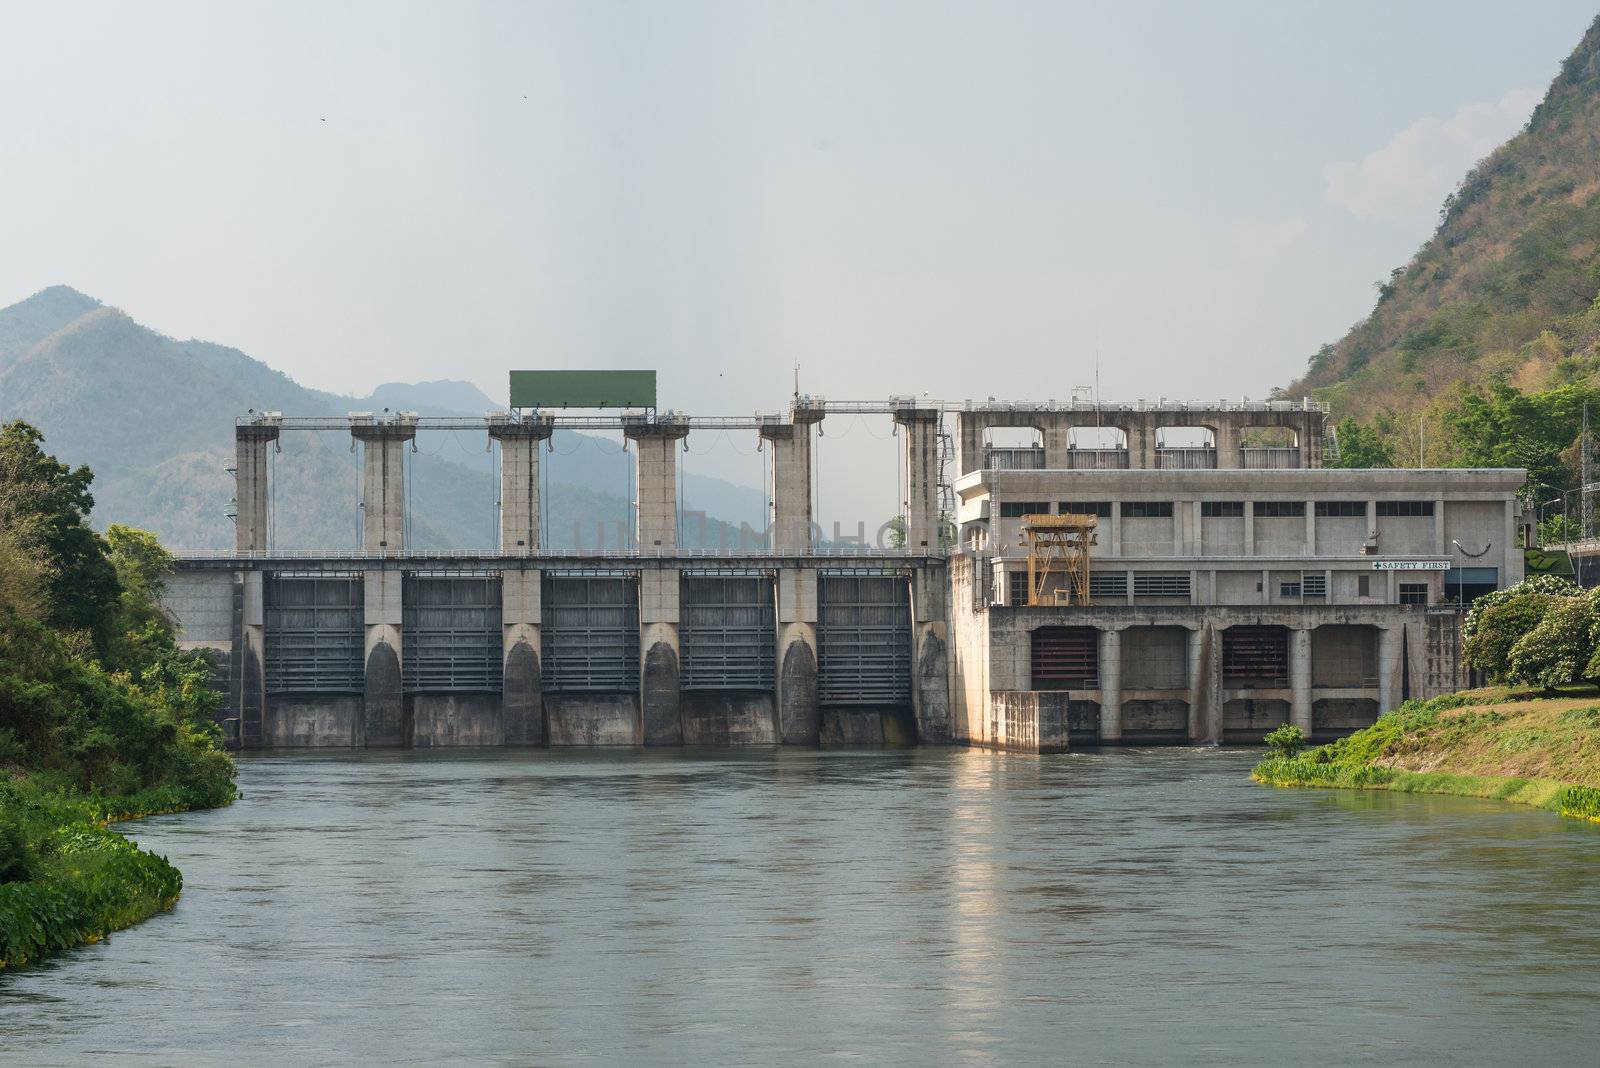 Medium size dam with metal water gate in Thailand by sasilsolutions